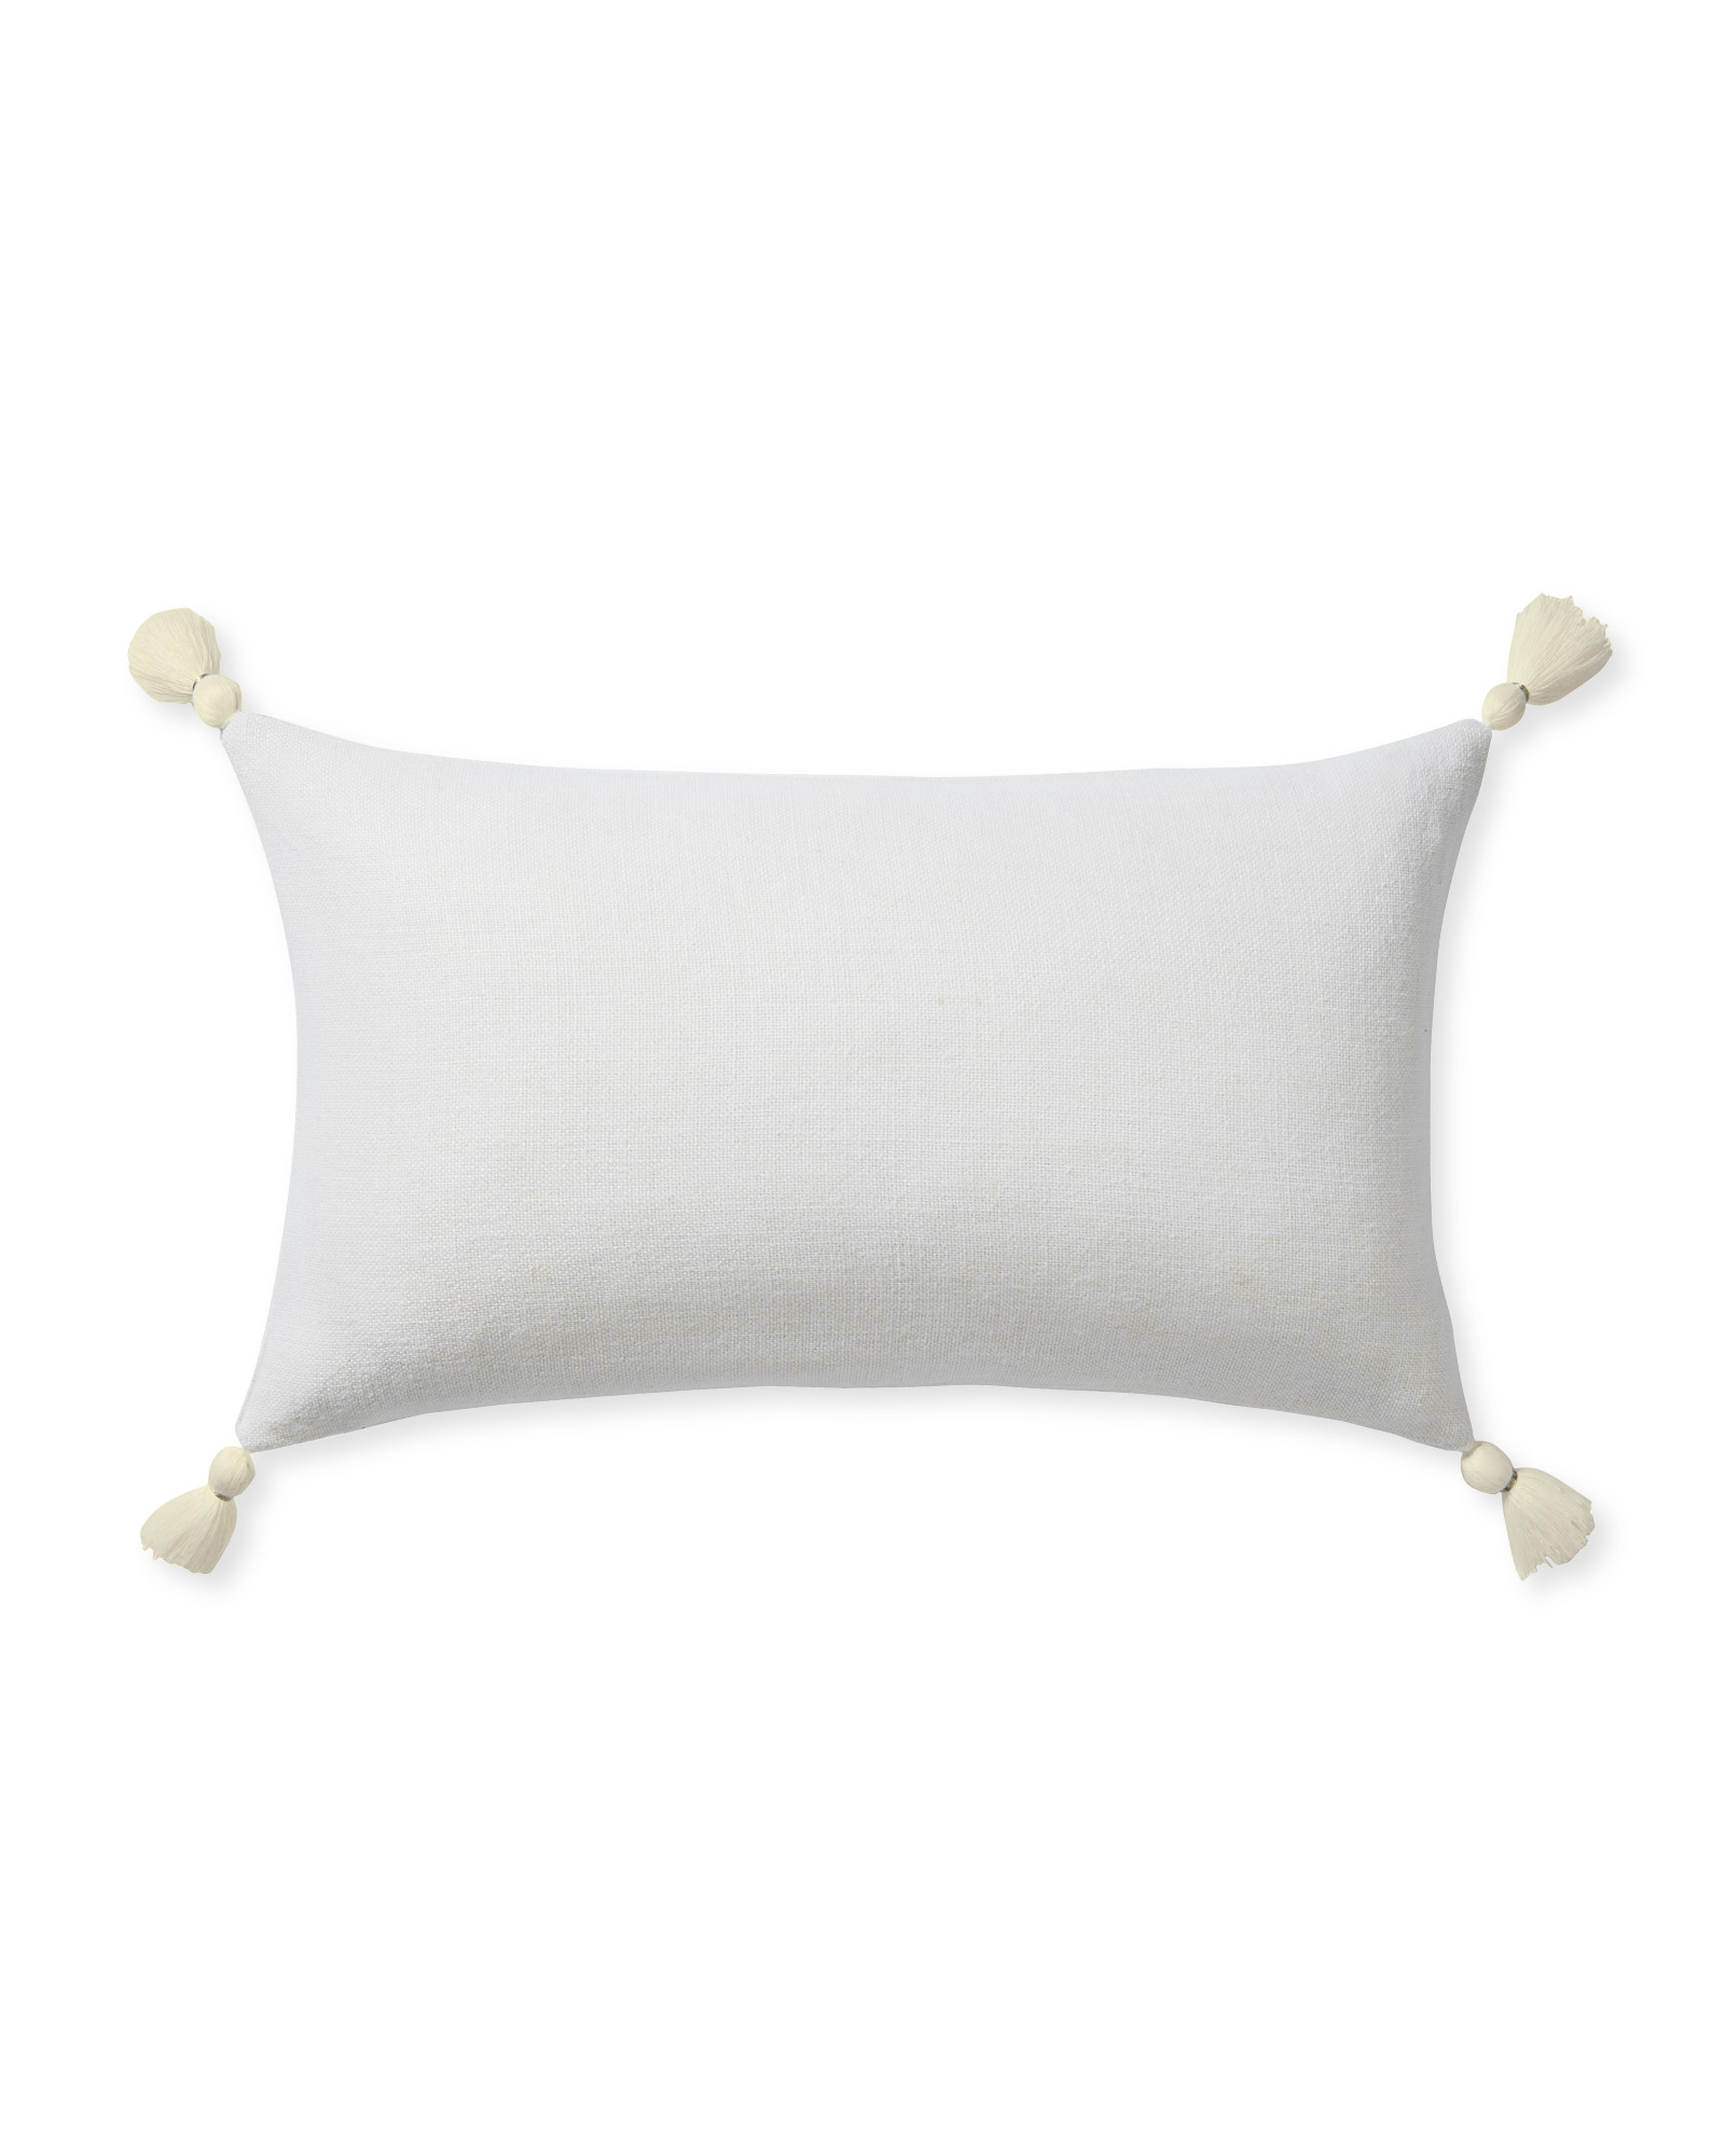 Eva Tassel 12" x 21" Pillow Cover - White - Insert sold separately - Serena and Lily